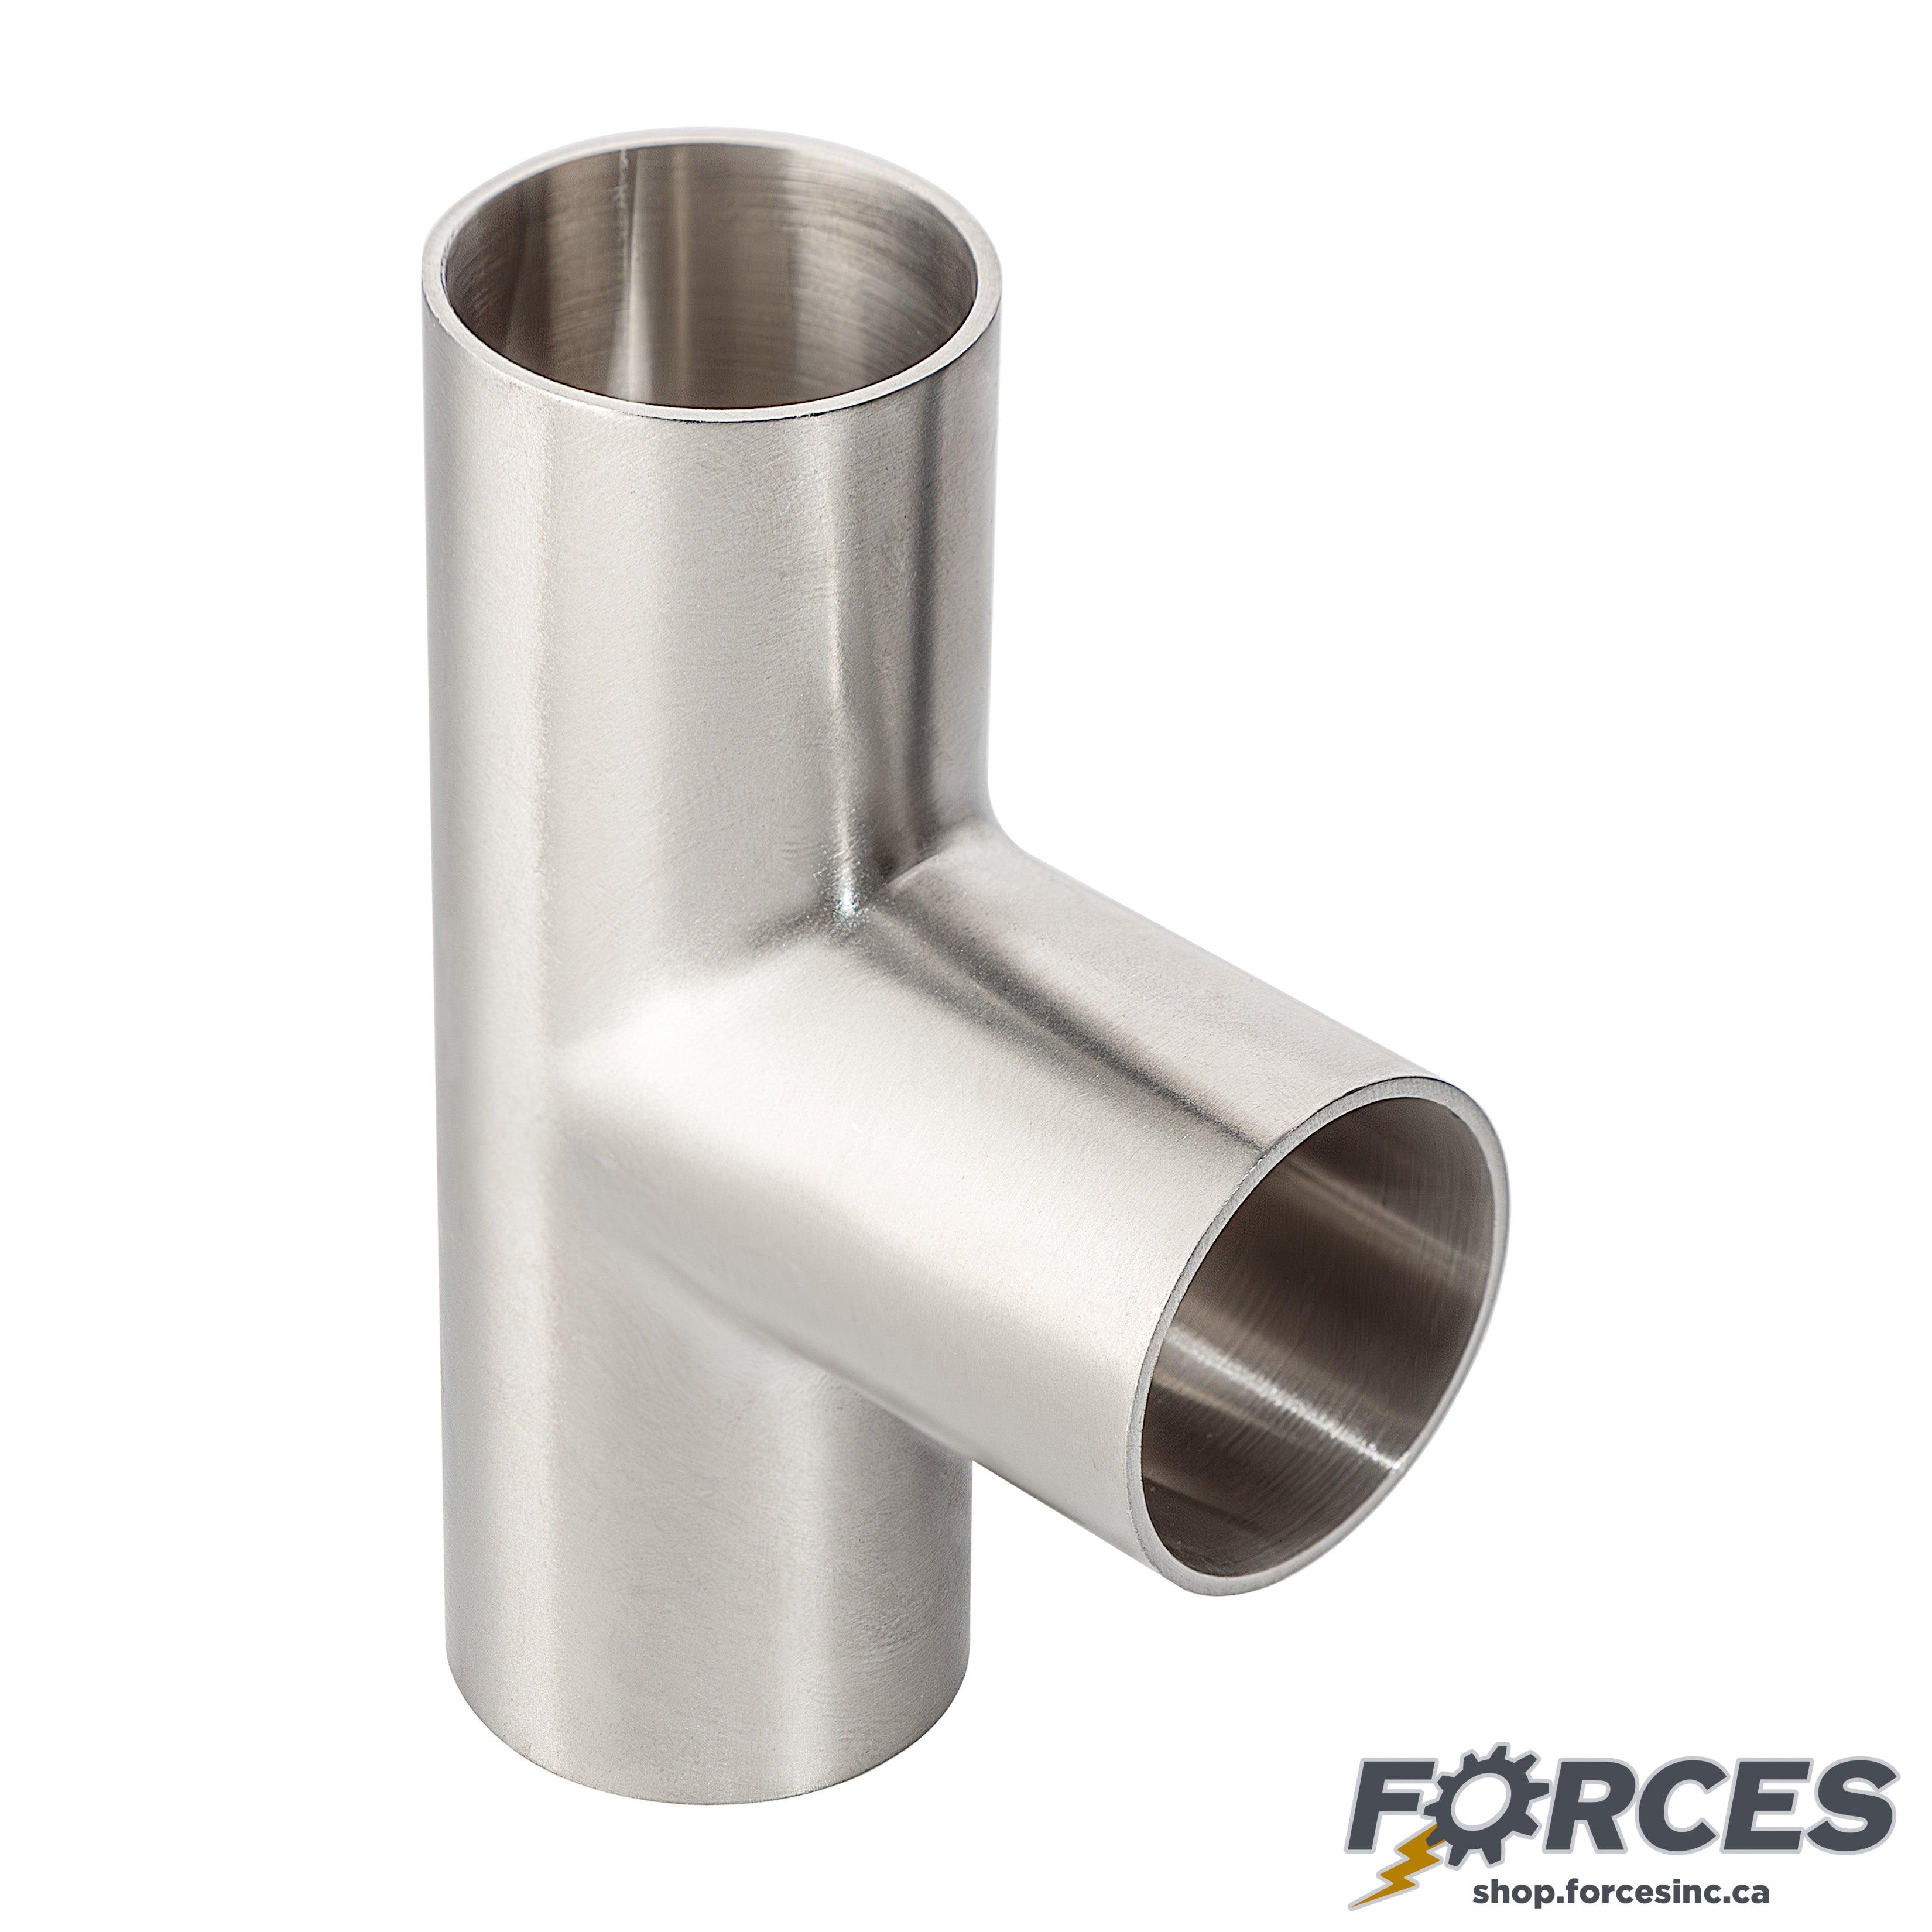 2" Butt Weld Long Tee - Stainless Steel 304 - Forces Inc